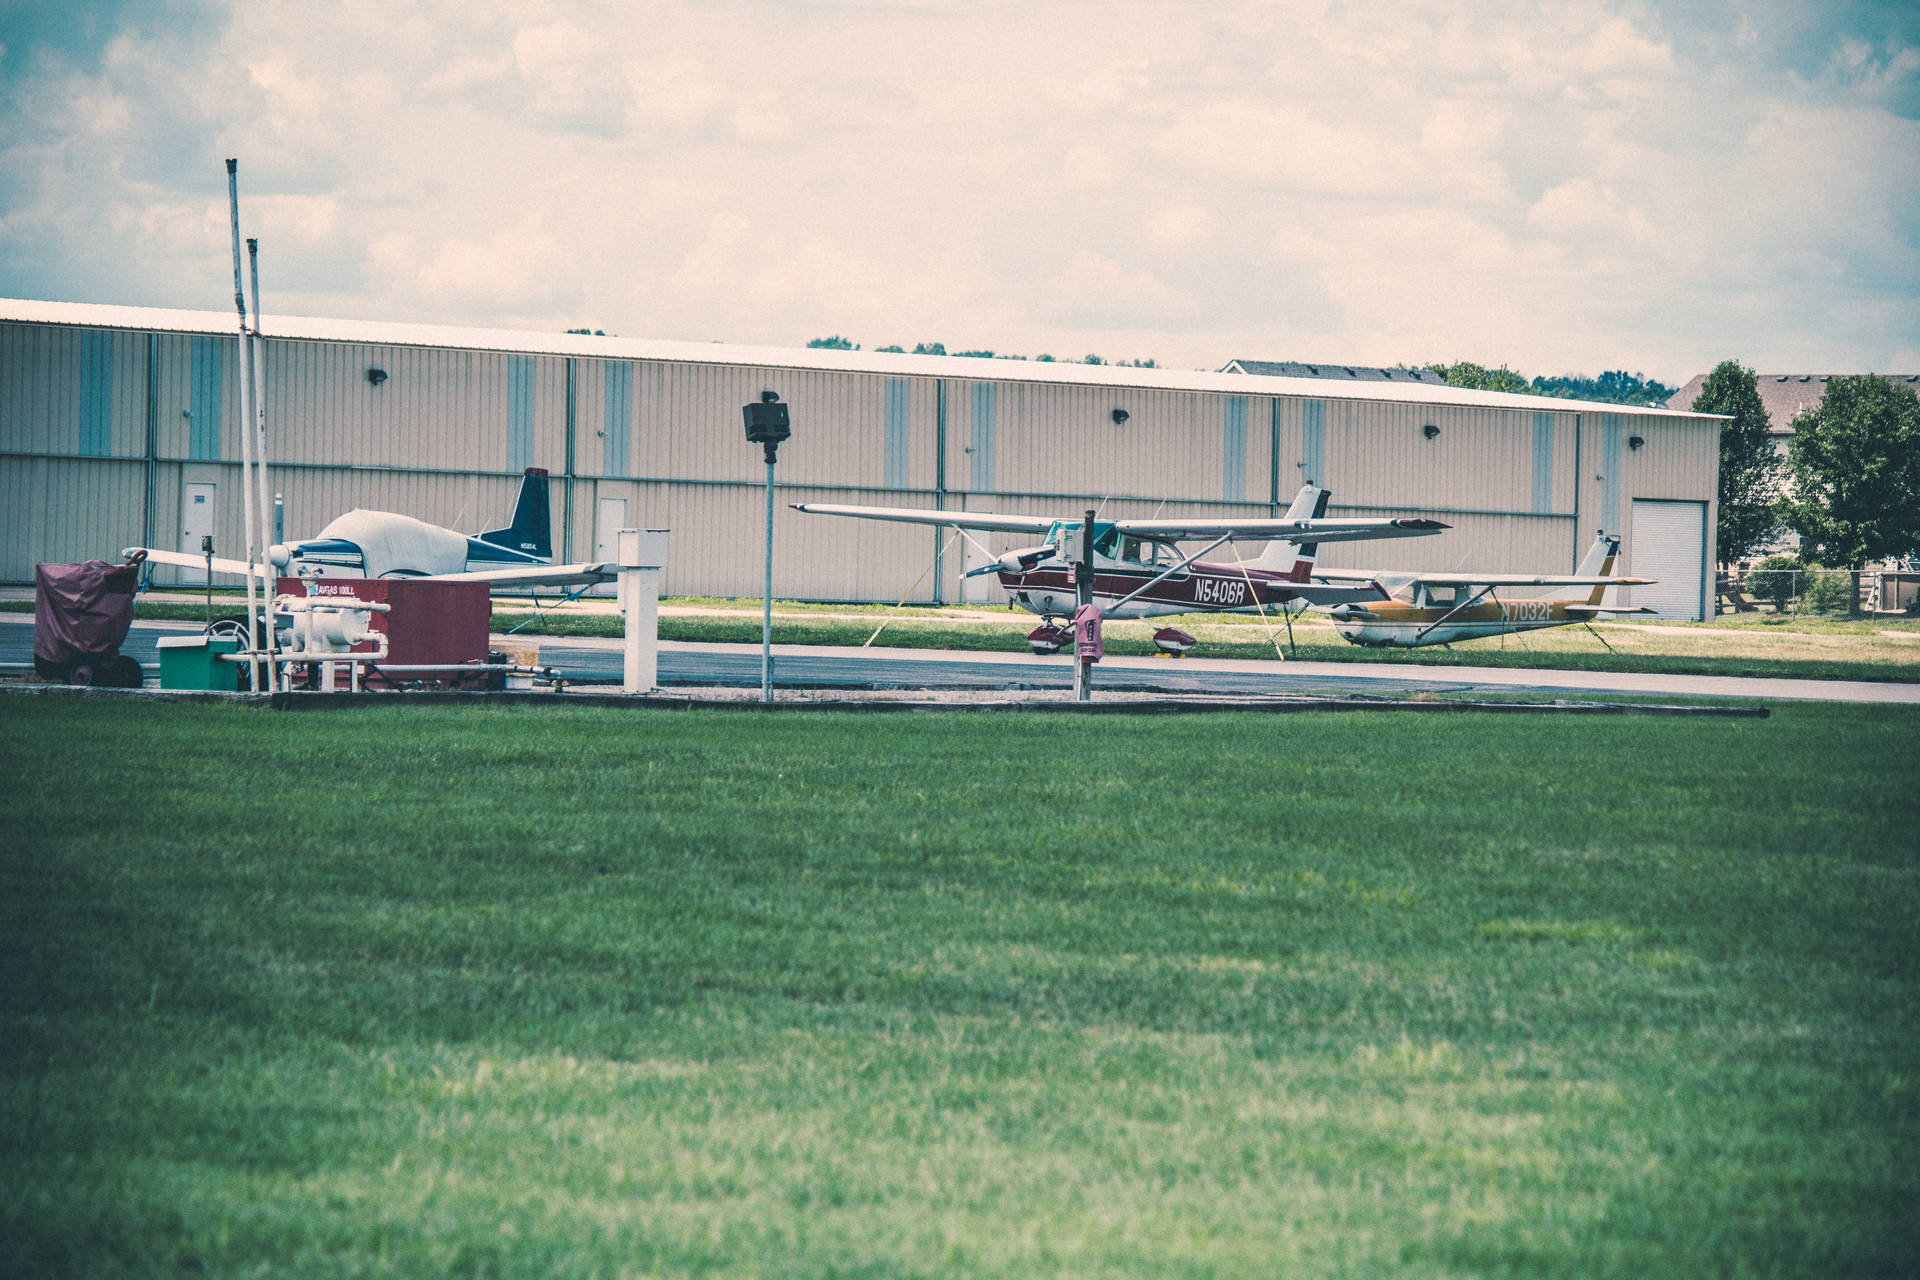 Small Plane On Grass Background